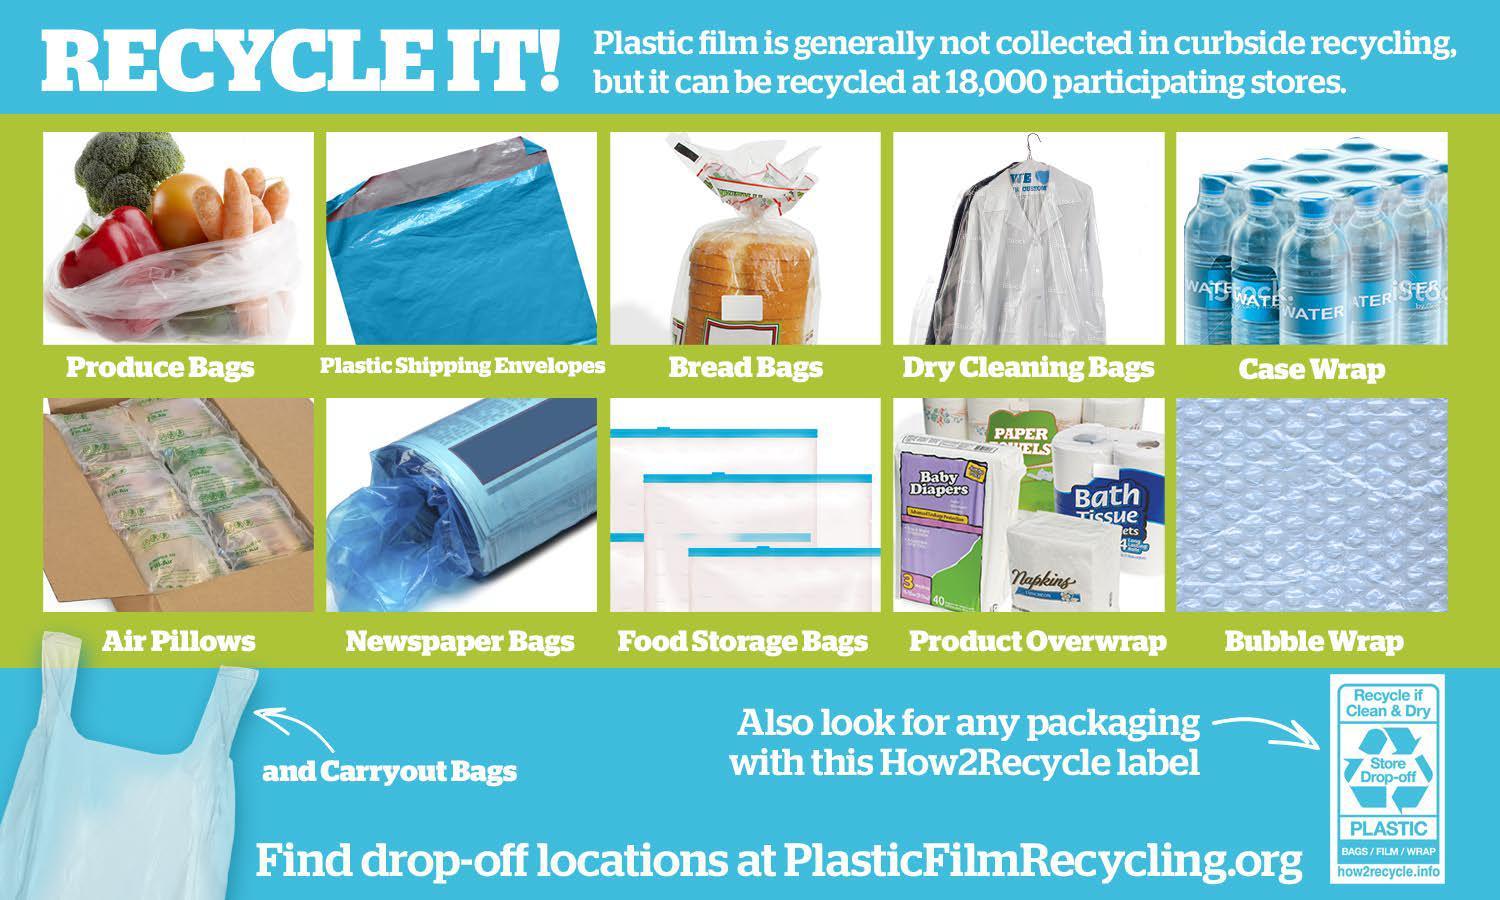 another image showing what types of film plastics can be returned to retail stores for recycling